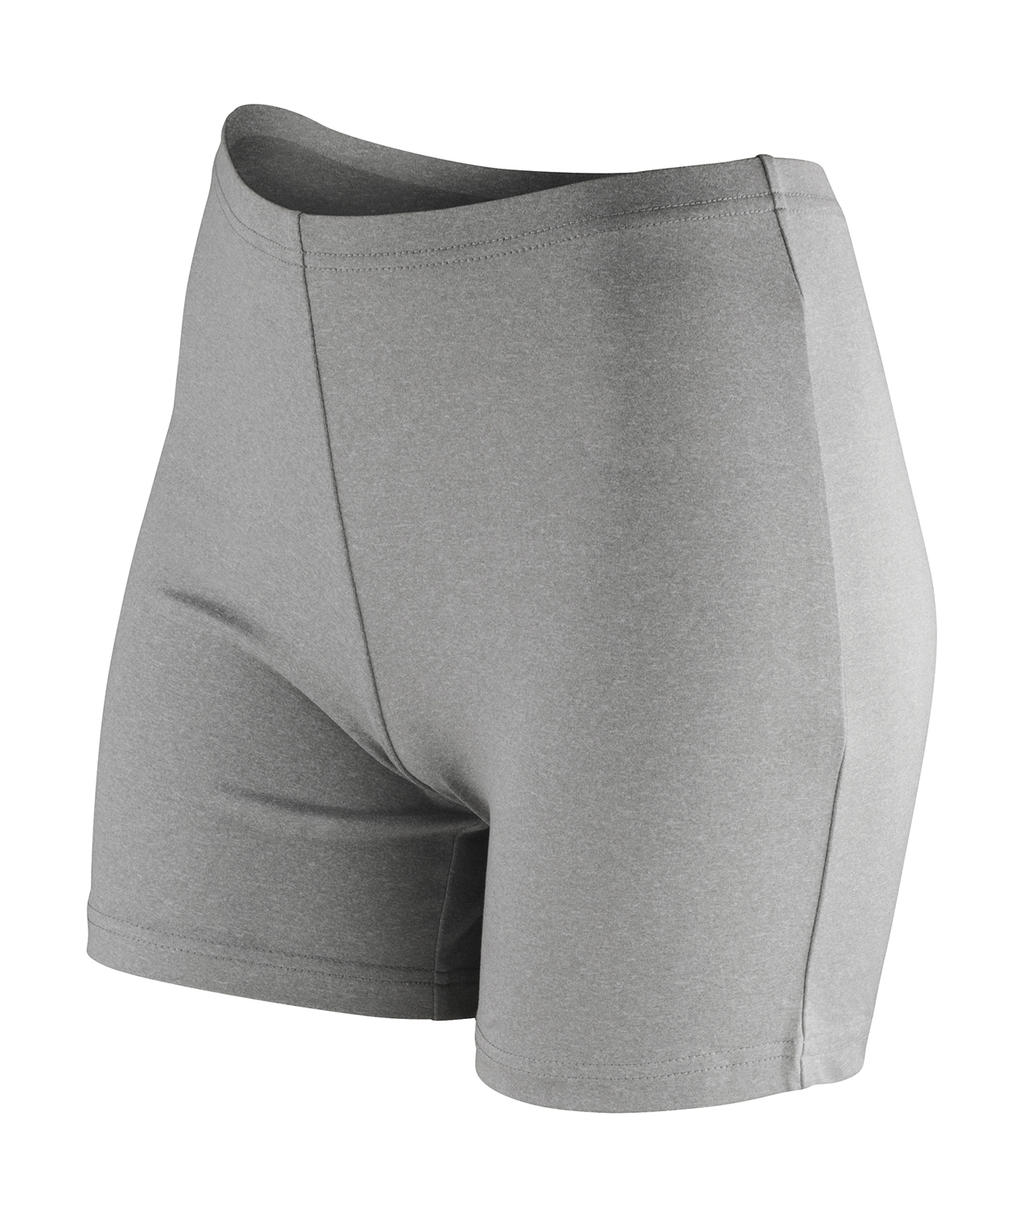  Womens Impact Softex? Shorts in Farbe Cloudy Grey